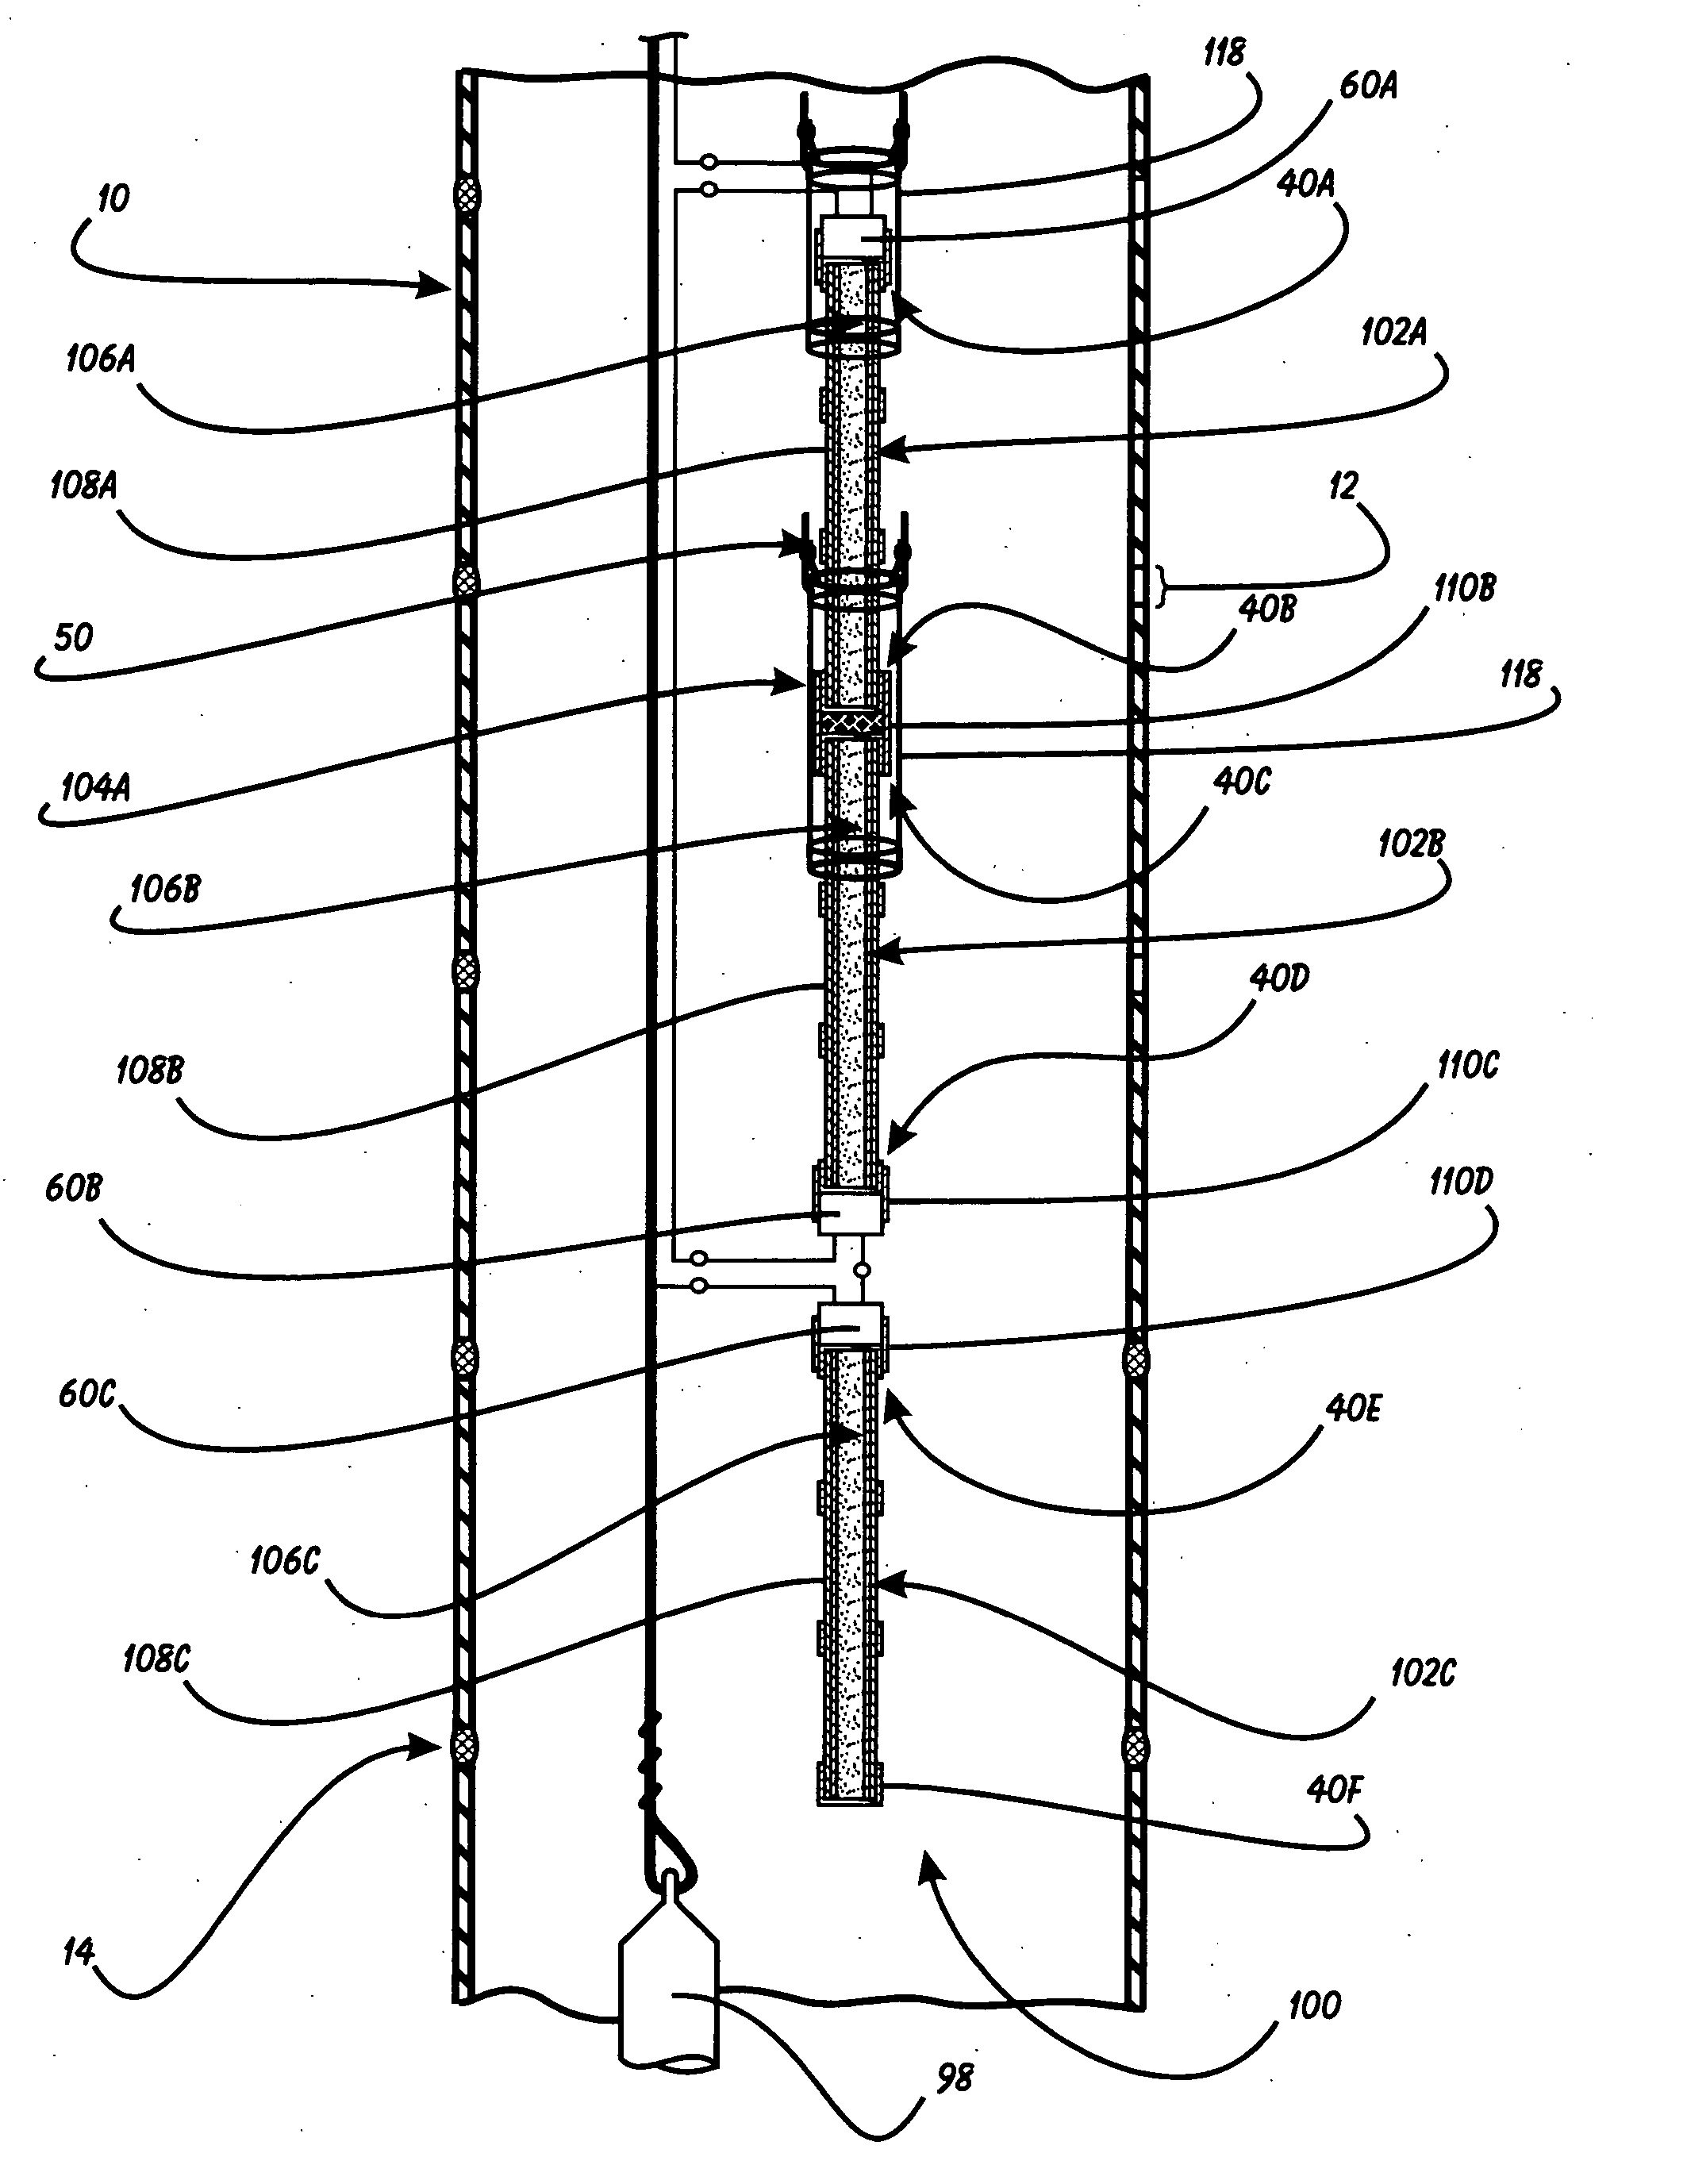 Well cleaning method and apparatus using detonating cord having additional reliability and a longer shelf life